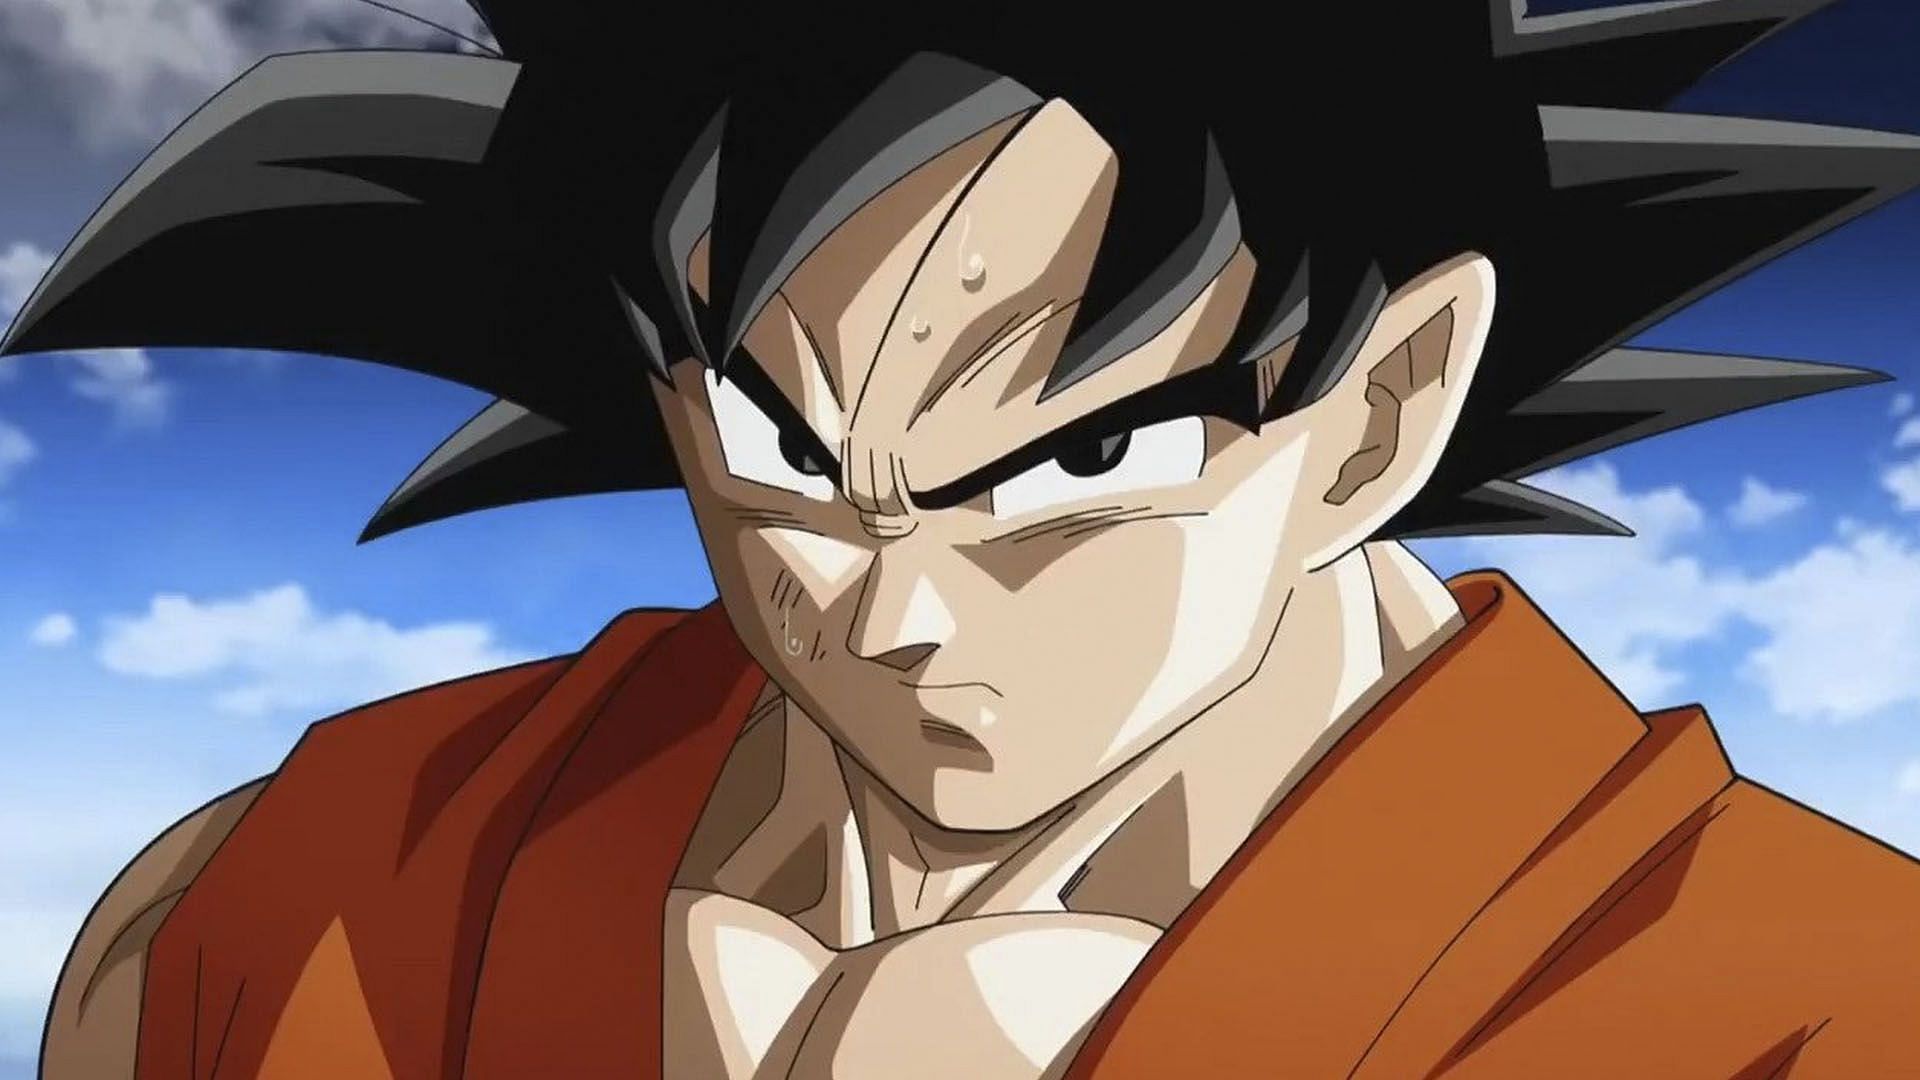 Goku as seen in the show (Image via Toei Animation)